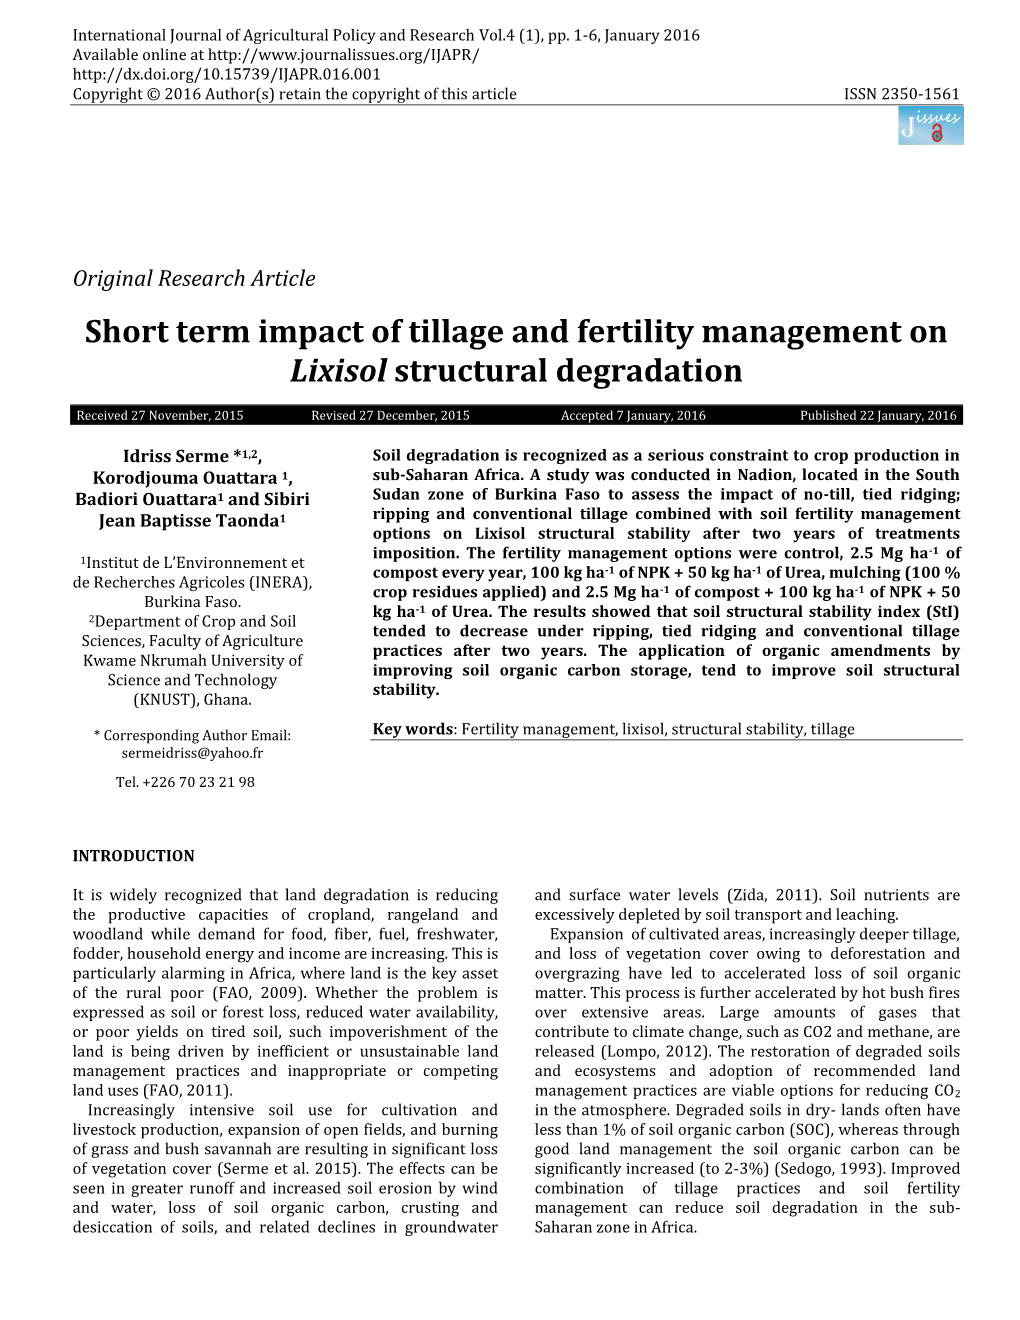 Short Term Impact of Tillage and Fertility Management on Lixisol Structural Degradation